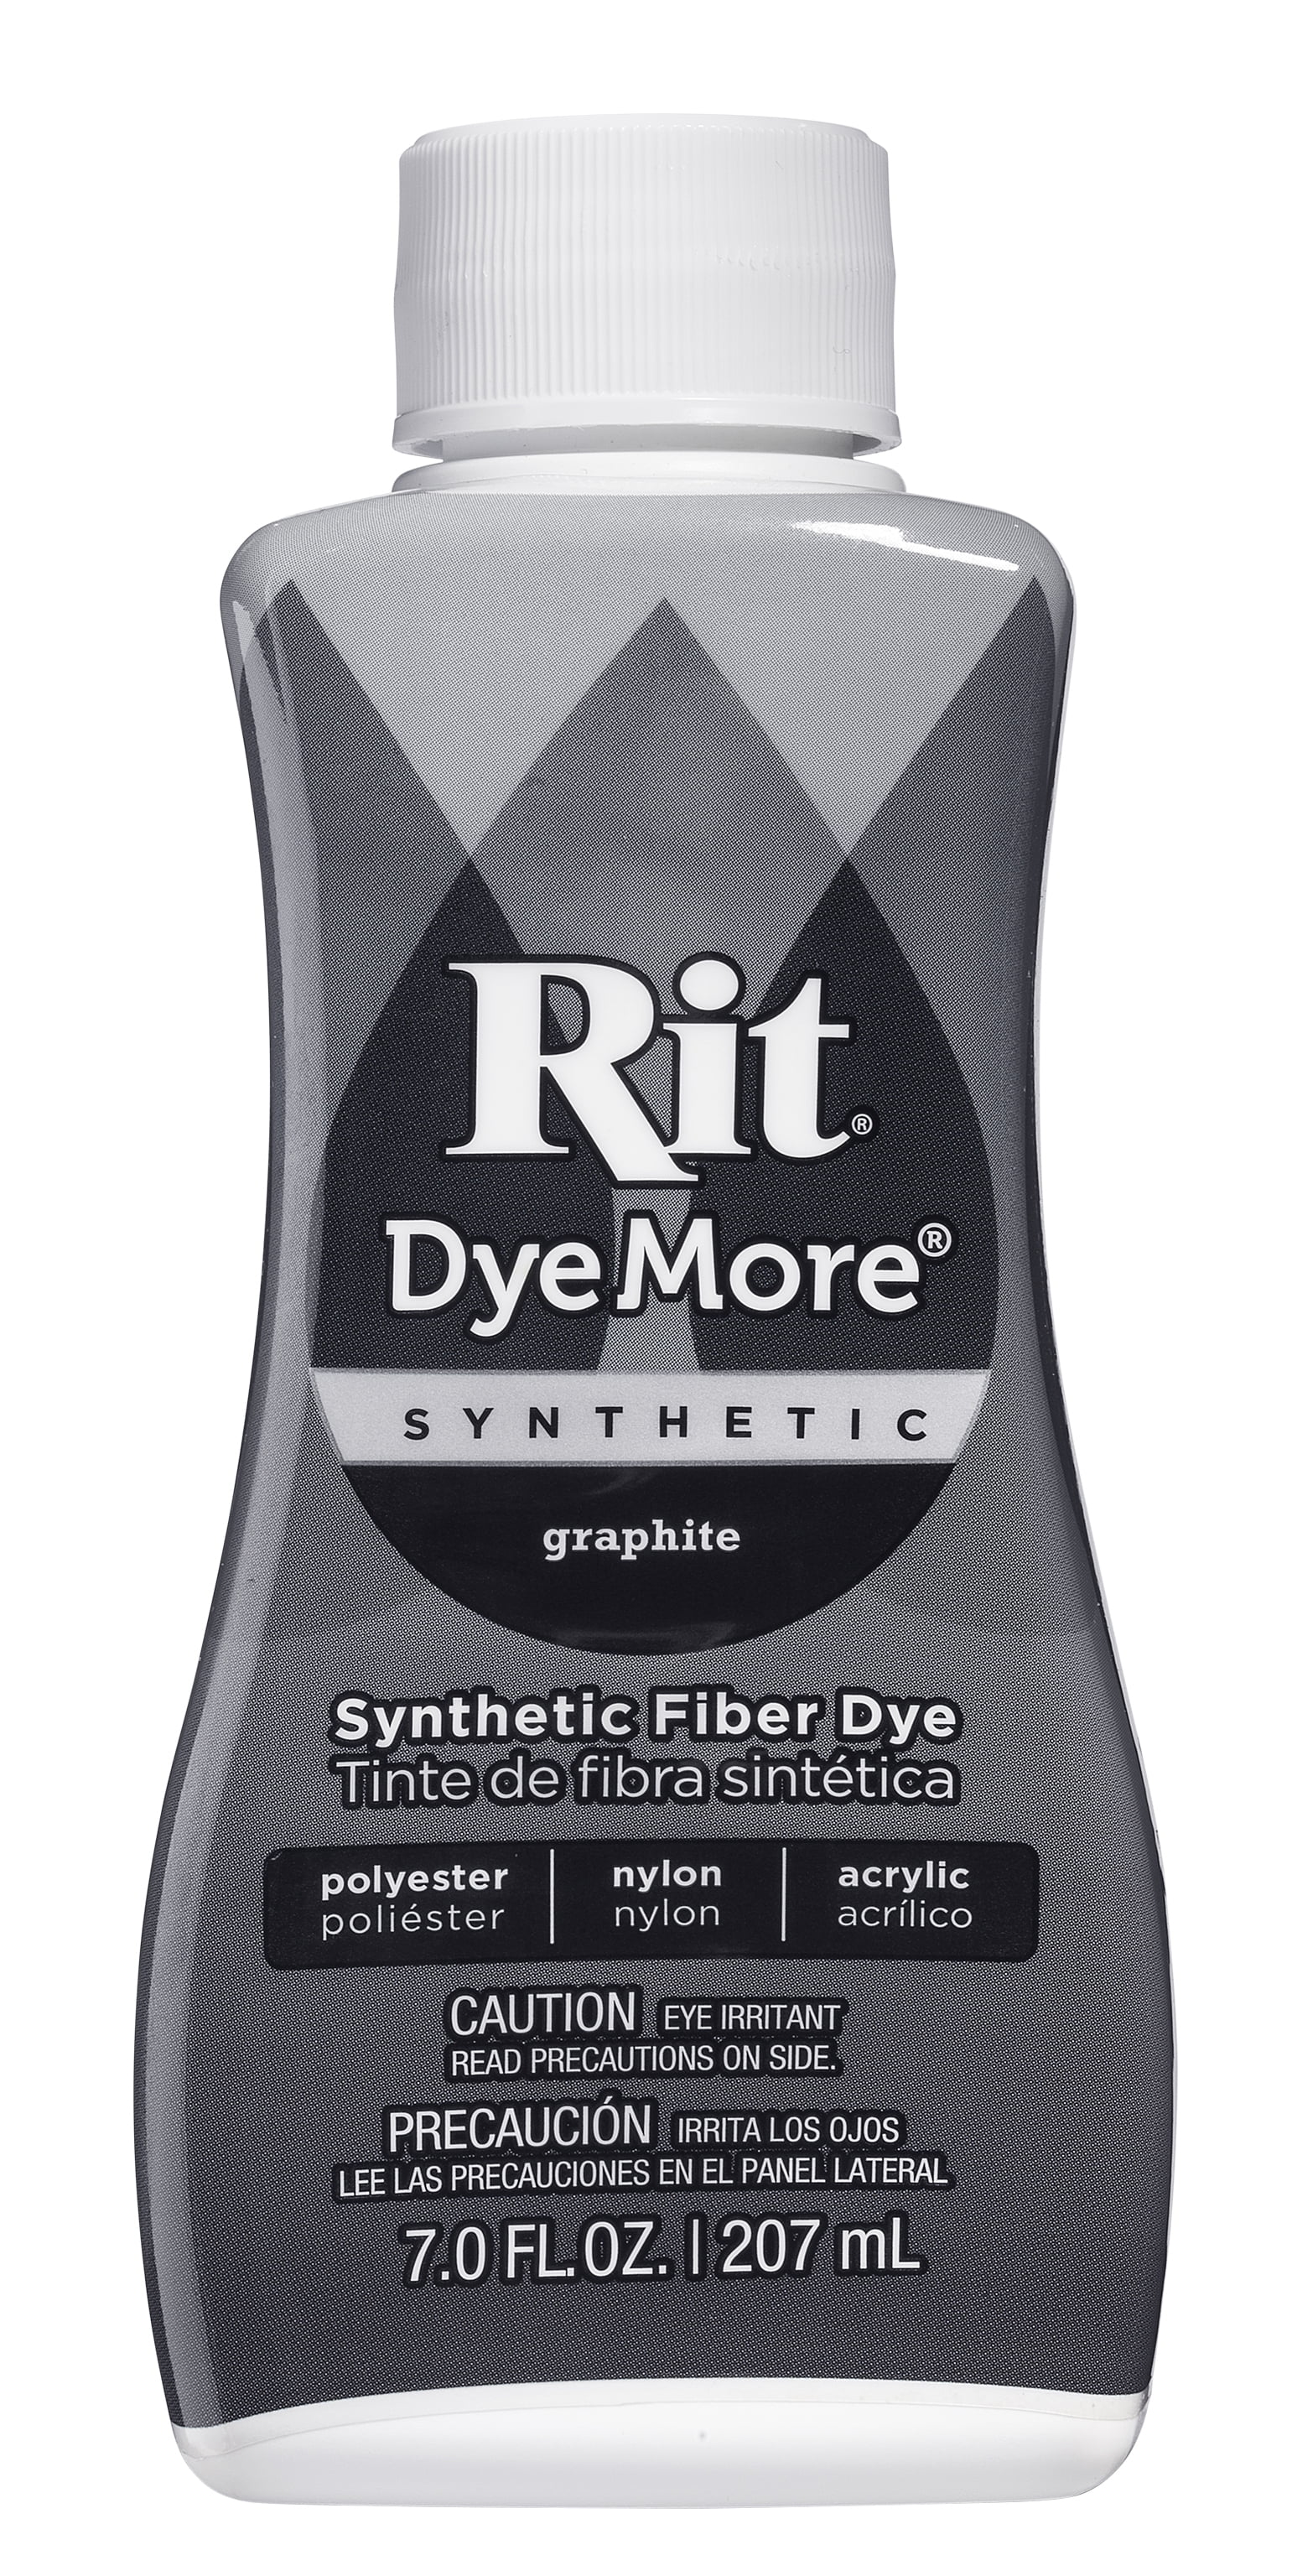 New Rit DyeMore Synthetic Fiber Dye Racing Red Polyester Nylon Acrylic 7 oz 